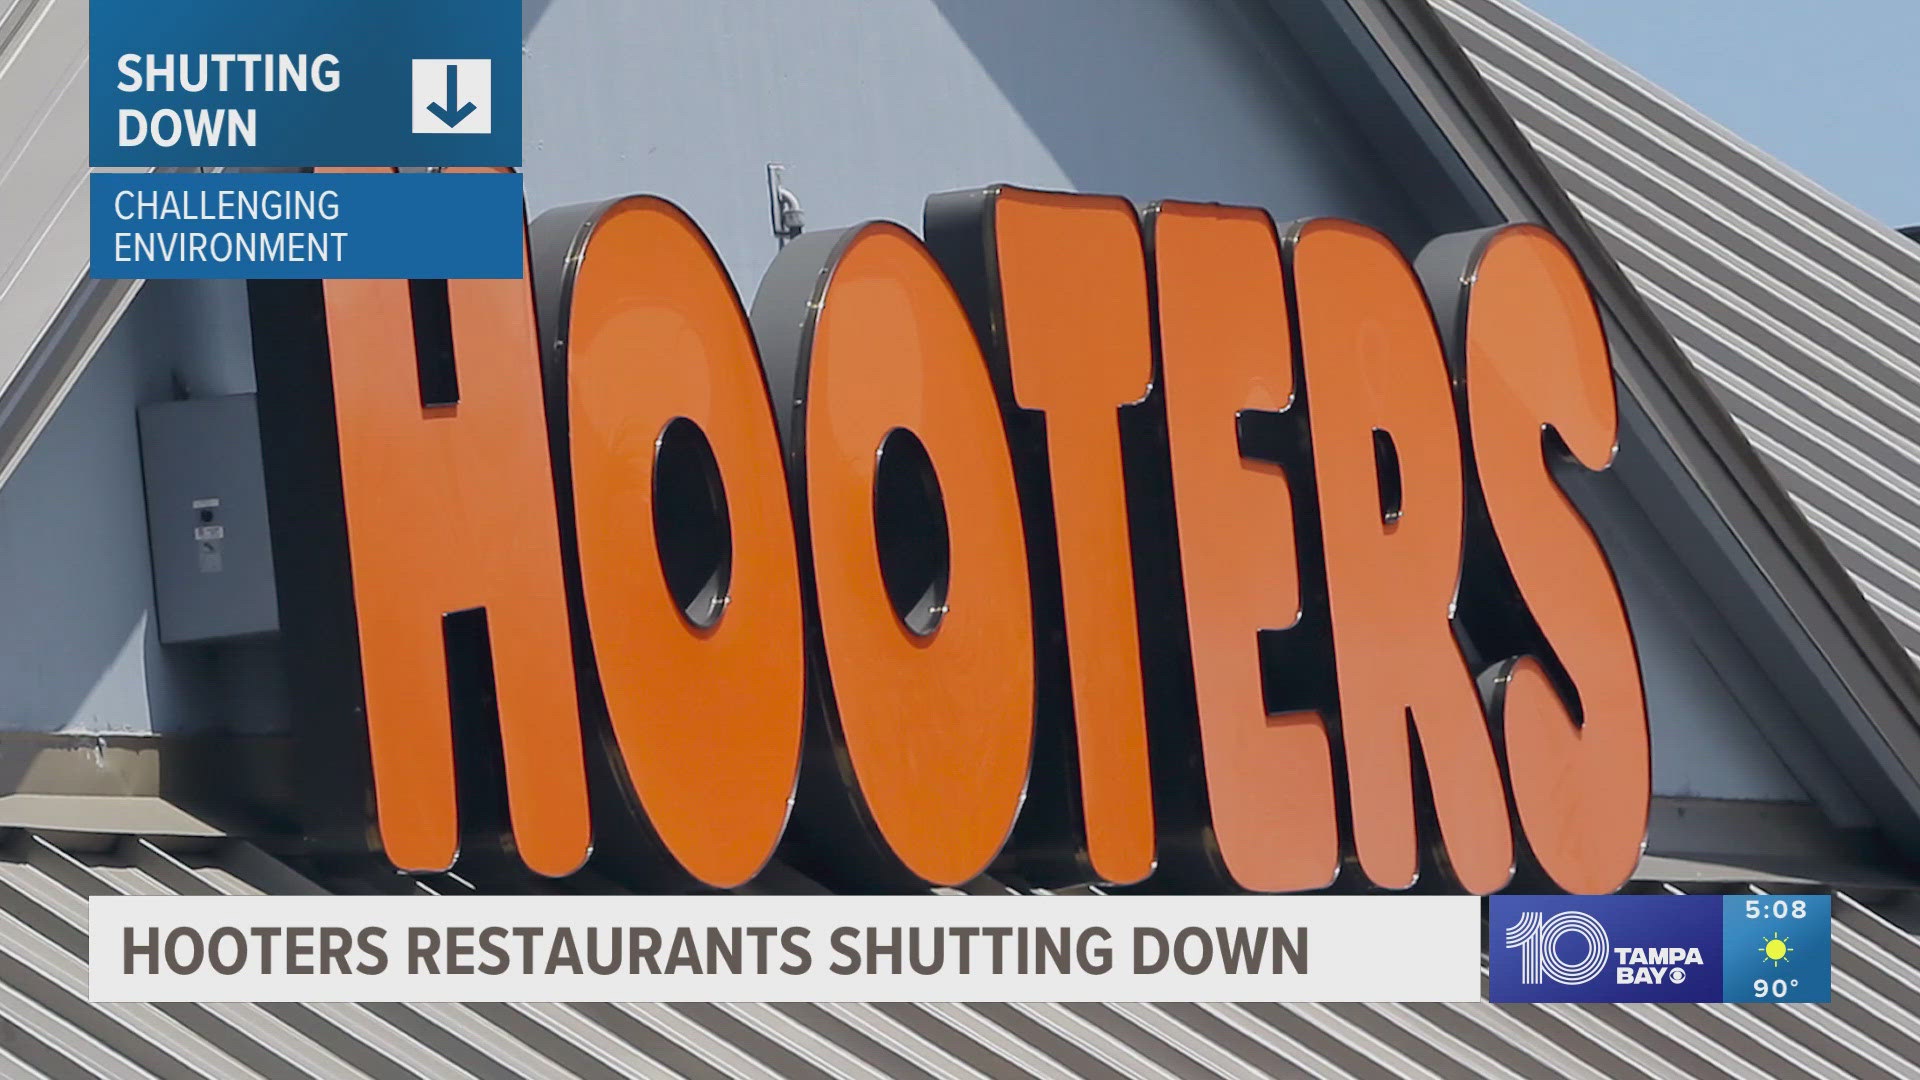 All locations set to shut down have not yet been released, however the Lakeland location has closed.